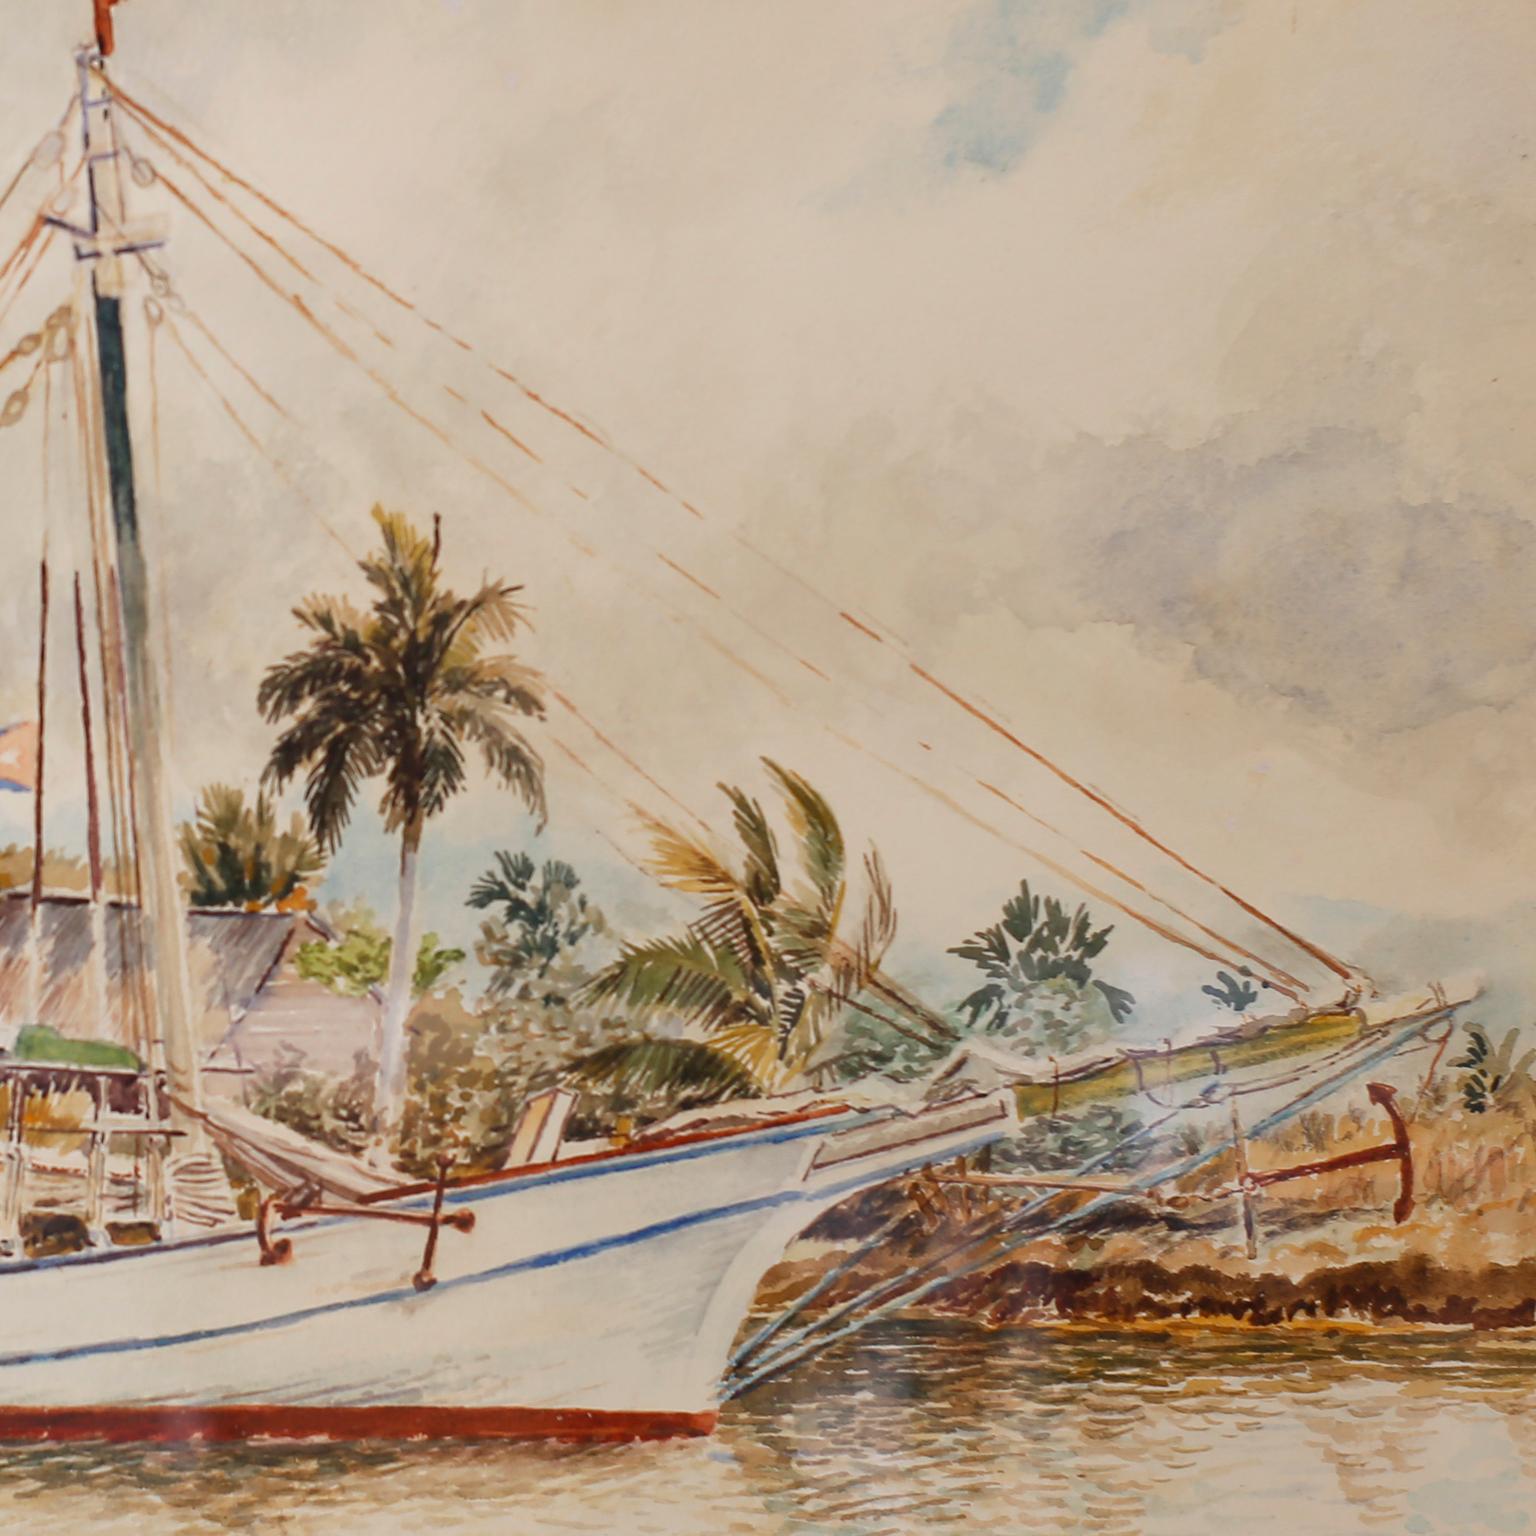 Watercolor on paper of a sailboat in repose, flying a Cuban flag, in a tropical setting as if some grand adventure is waiting. Presented under glass and signed Judy Brown with the original gallery tag on the back.